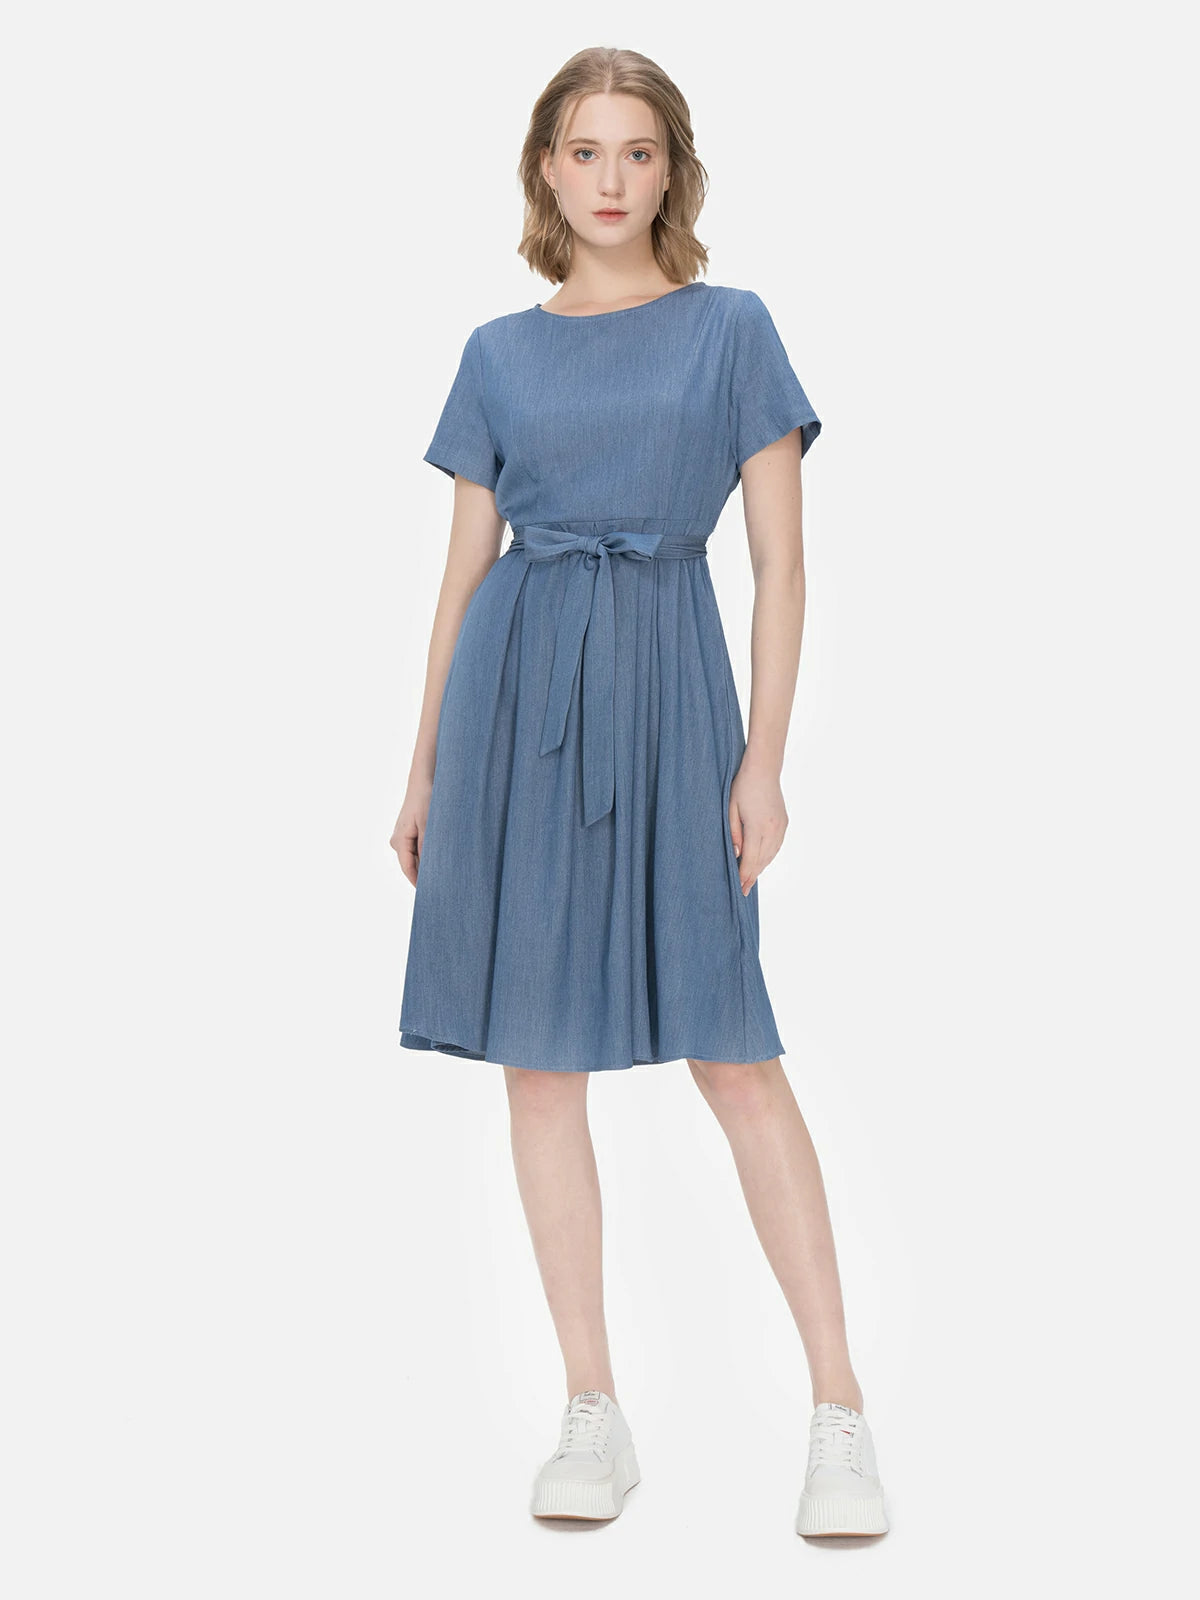 Classic solid color midi dress with tie-waist detail for a timeless look